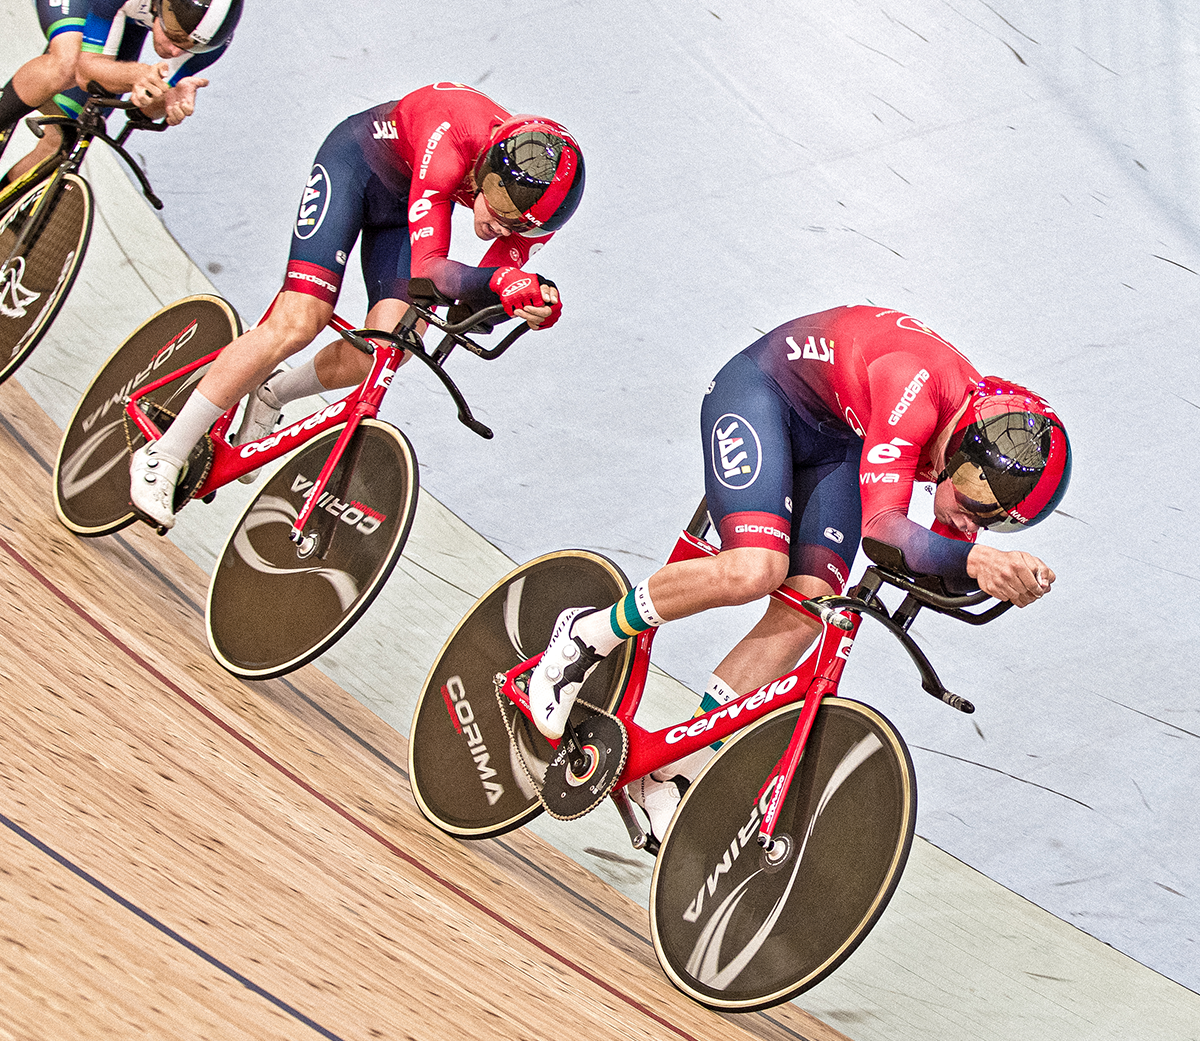 SASI cyclists behind each other on the velodrome track